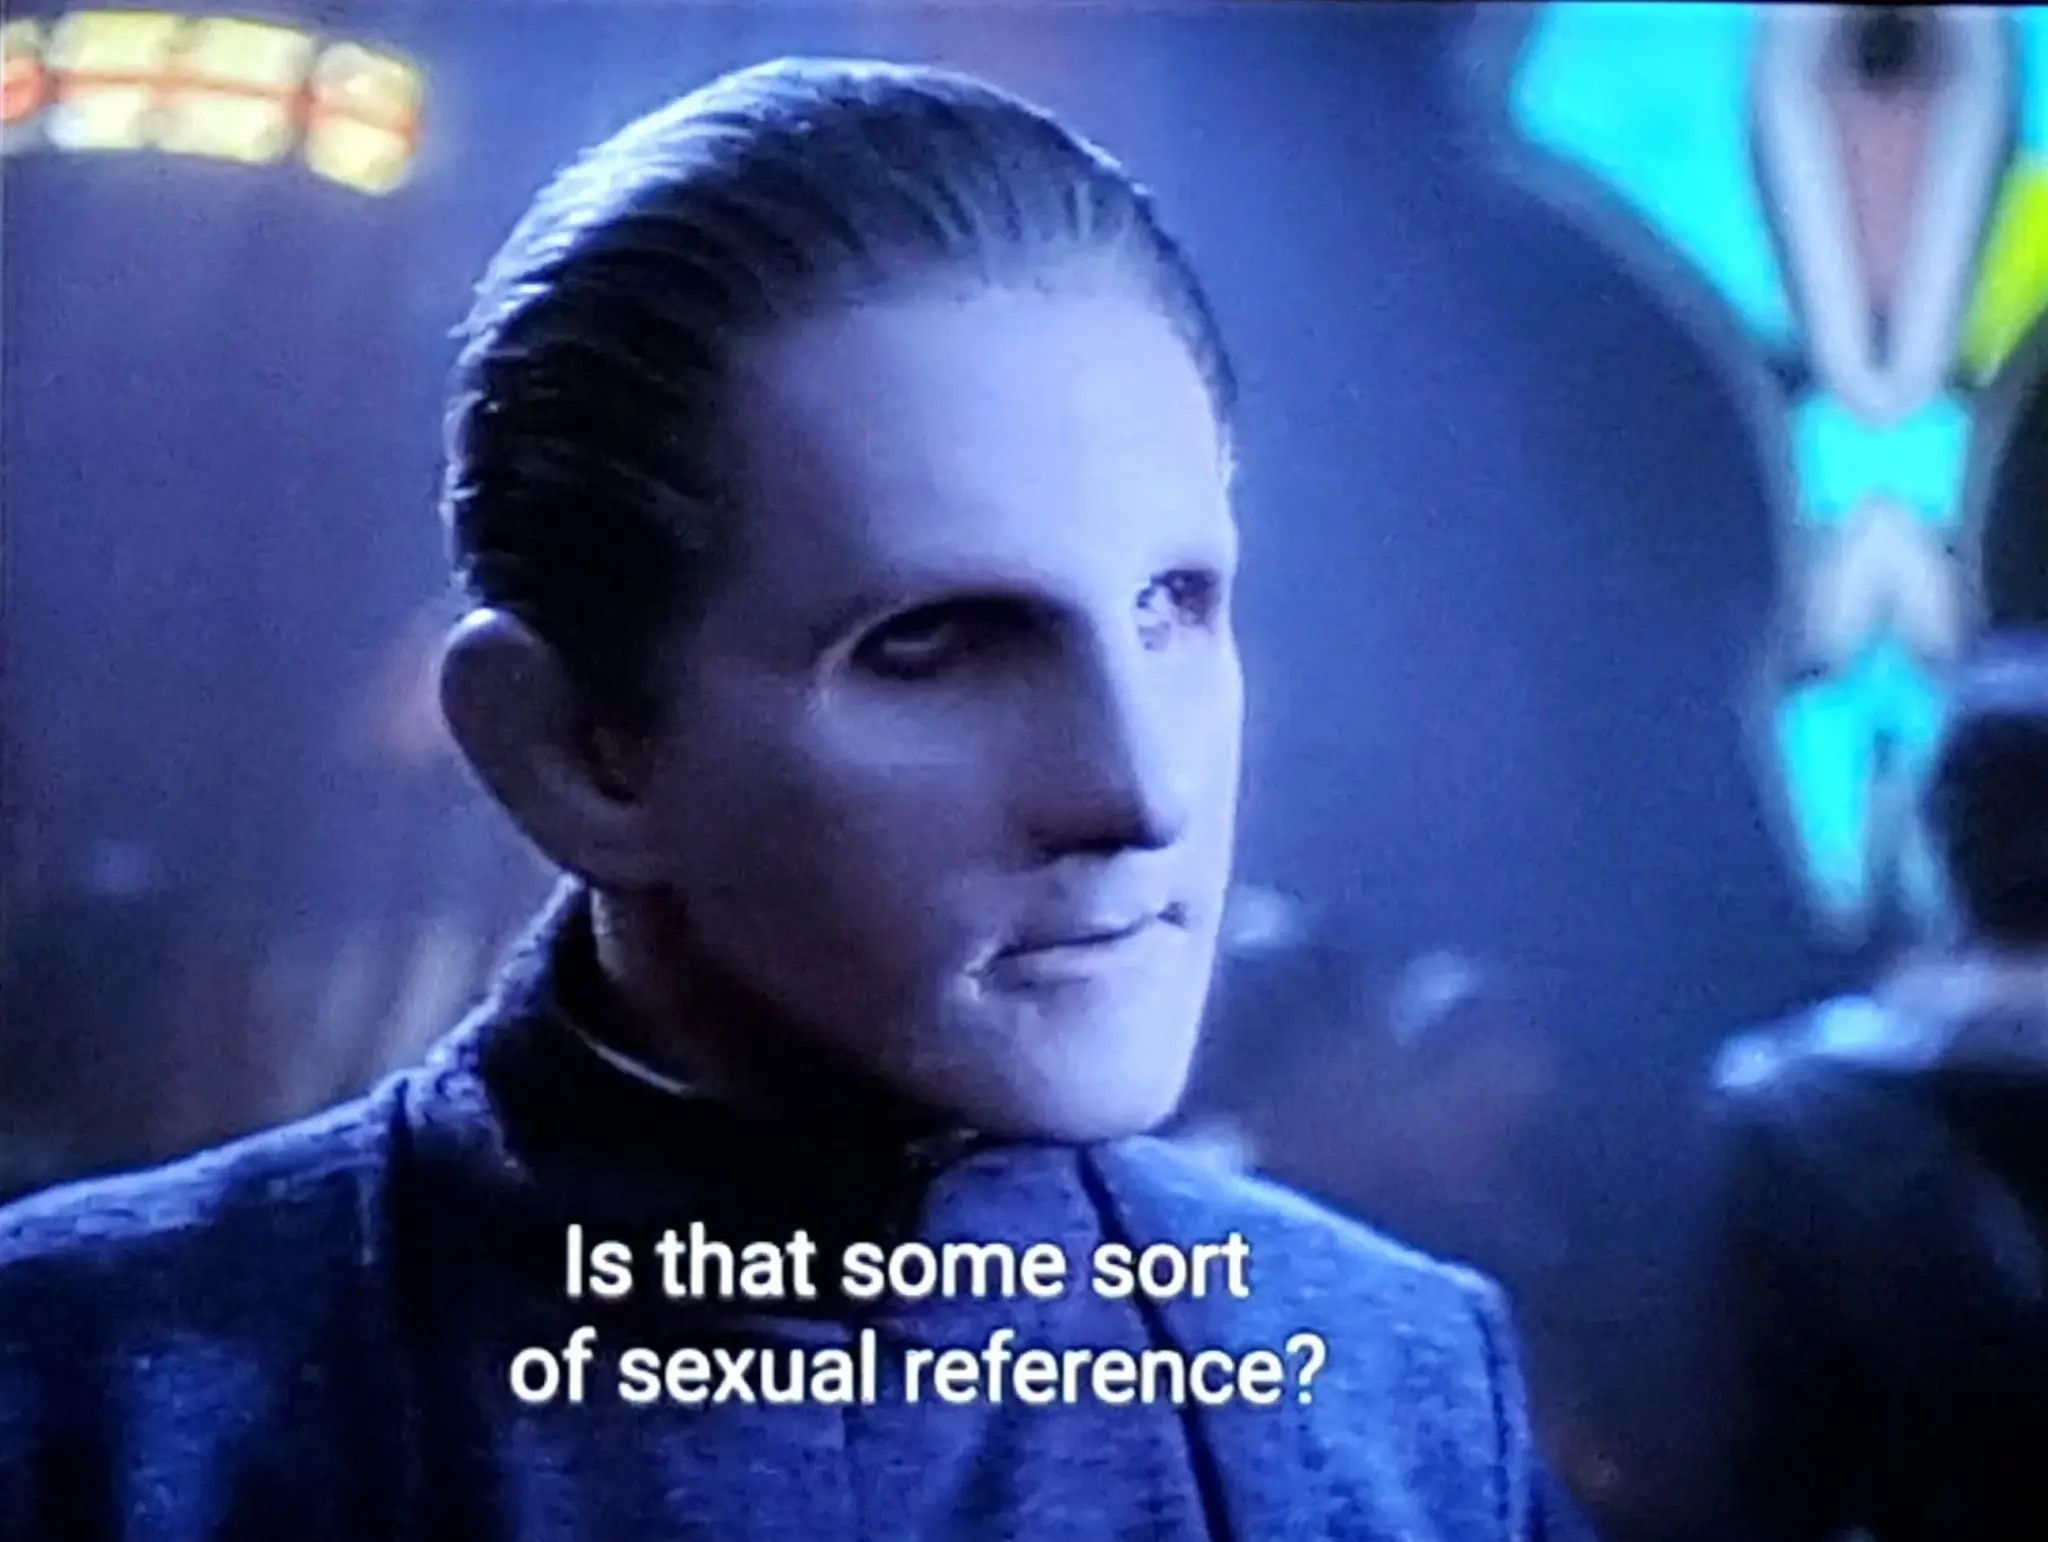 An image of Odo saying "is that some sort of sexual reference?" Idr what episode it's from.